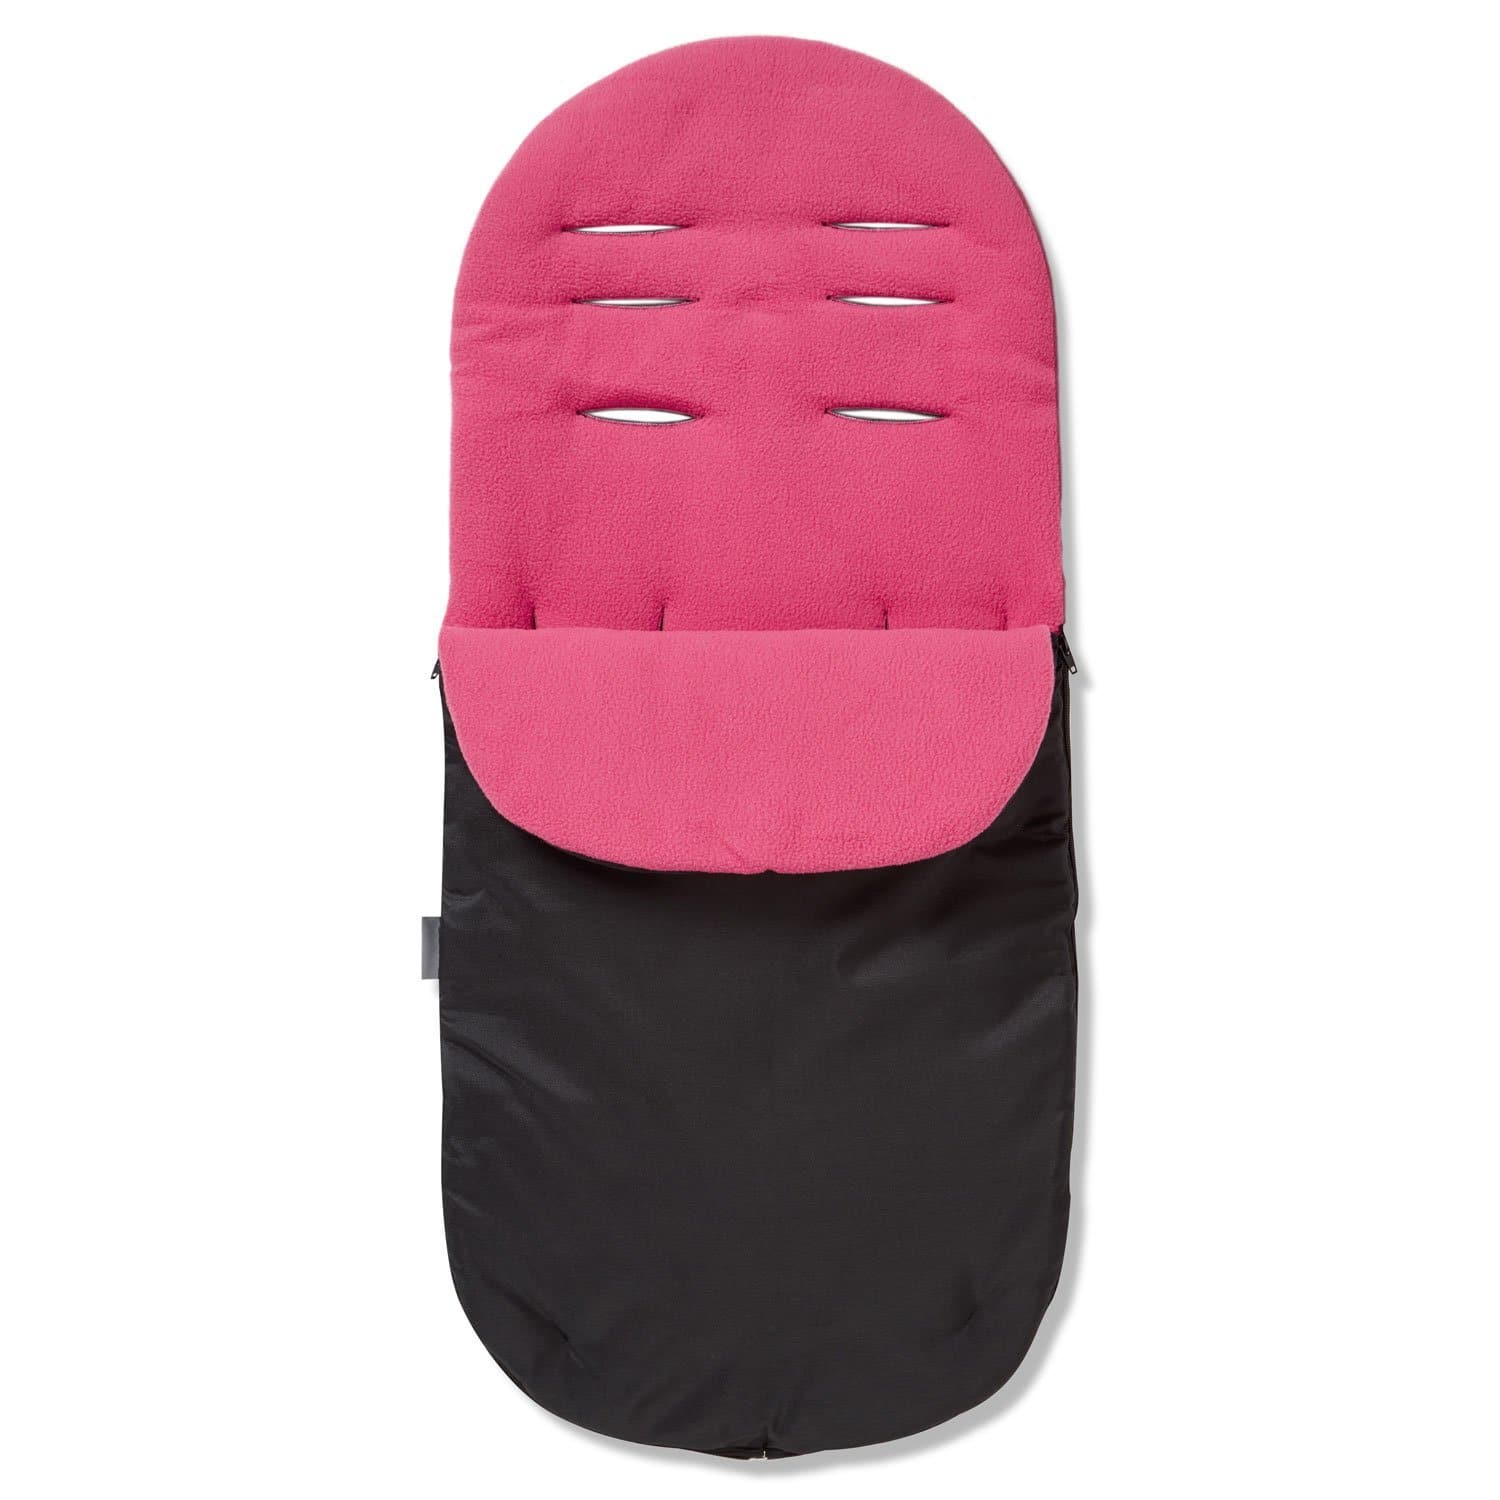 Footmuff / Cosy Toes Compatible with Bebe 9 - For Your Little One